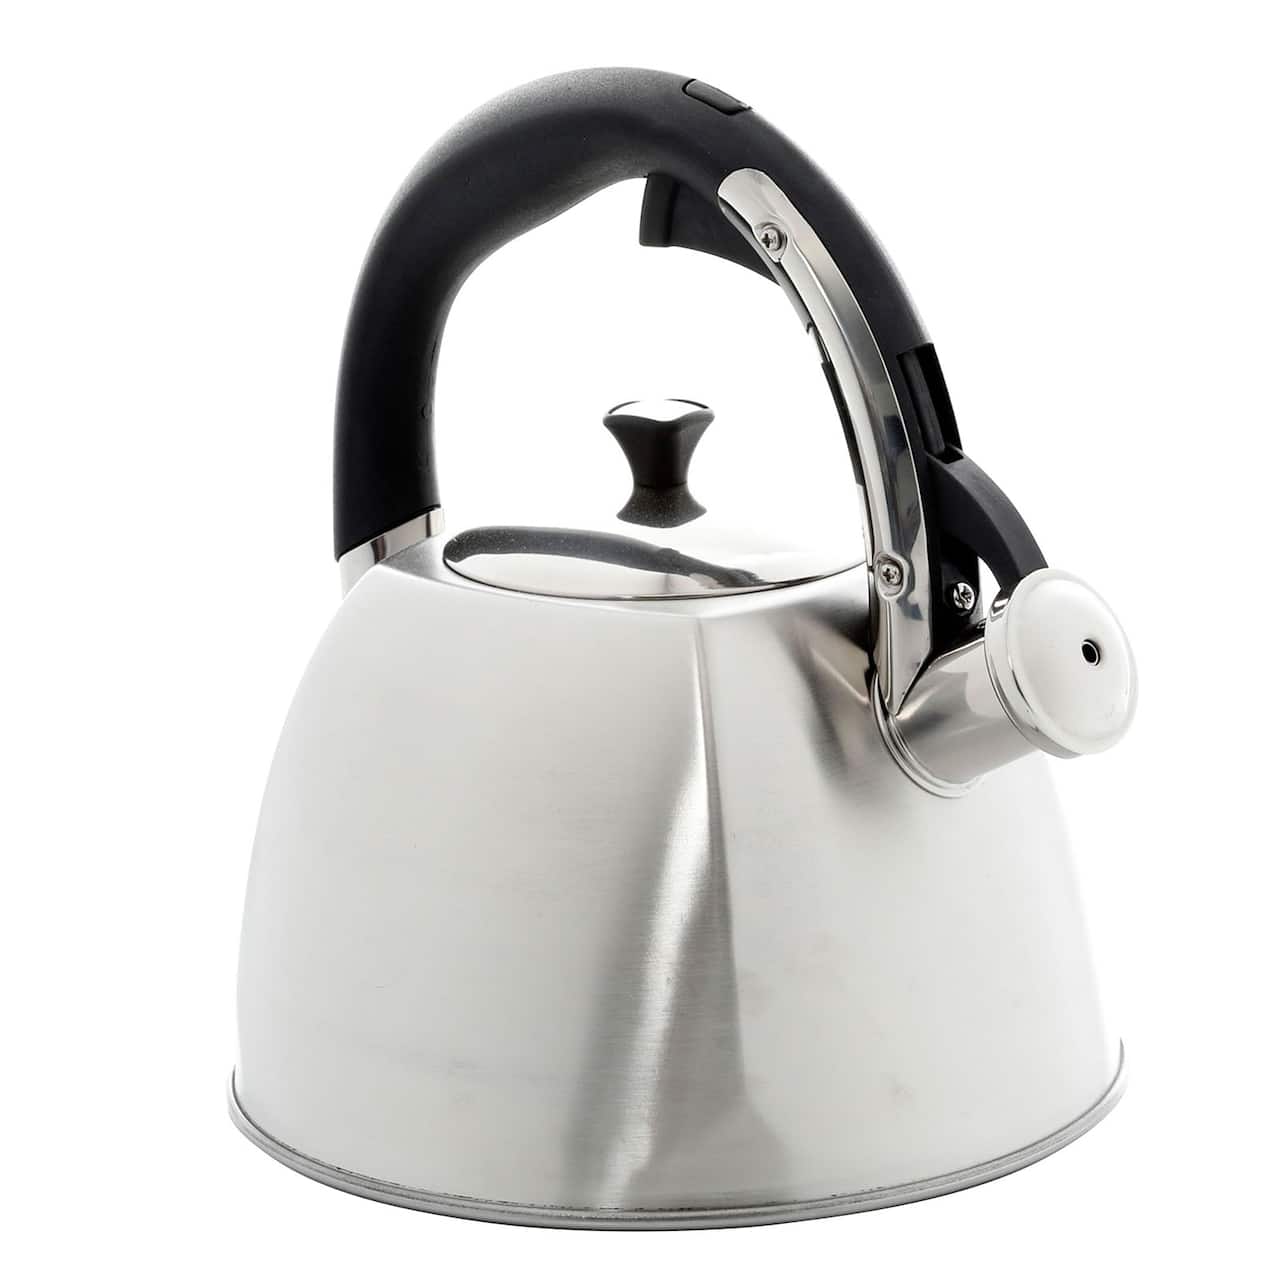 Mr. Coffee Belgrove 2.5qt. Brushed Stainless Steel Whistling Tea Kettle  with Nylon Handle